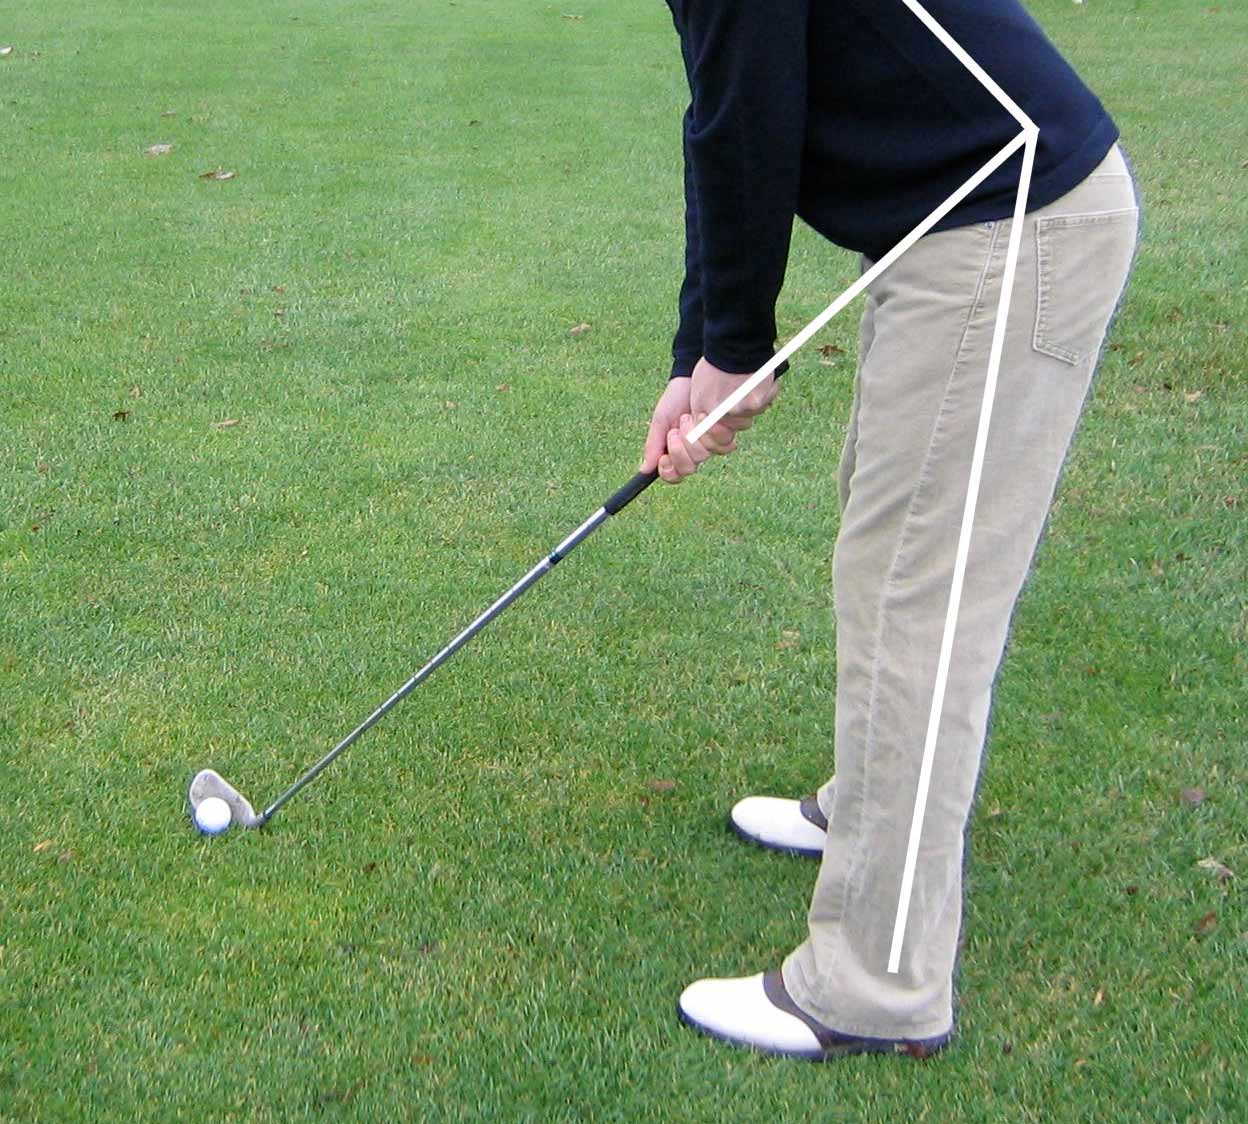 The back is still straight. All you need to do is bend at the waist until the club touches the ground.